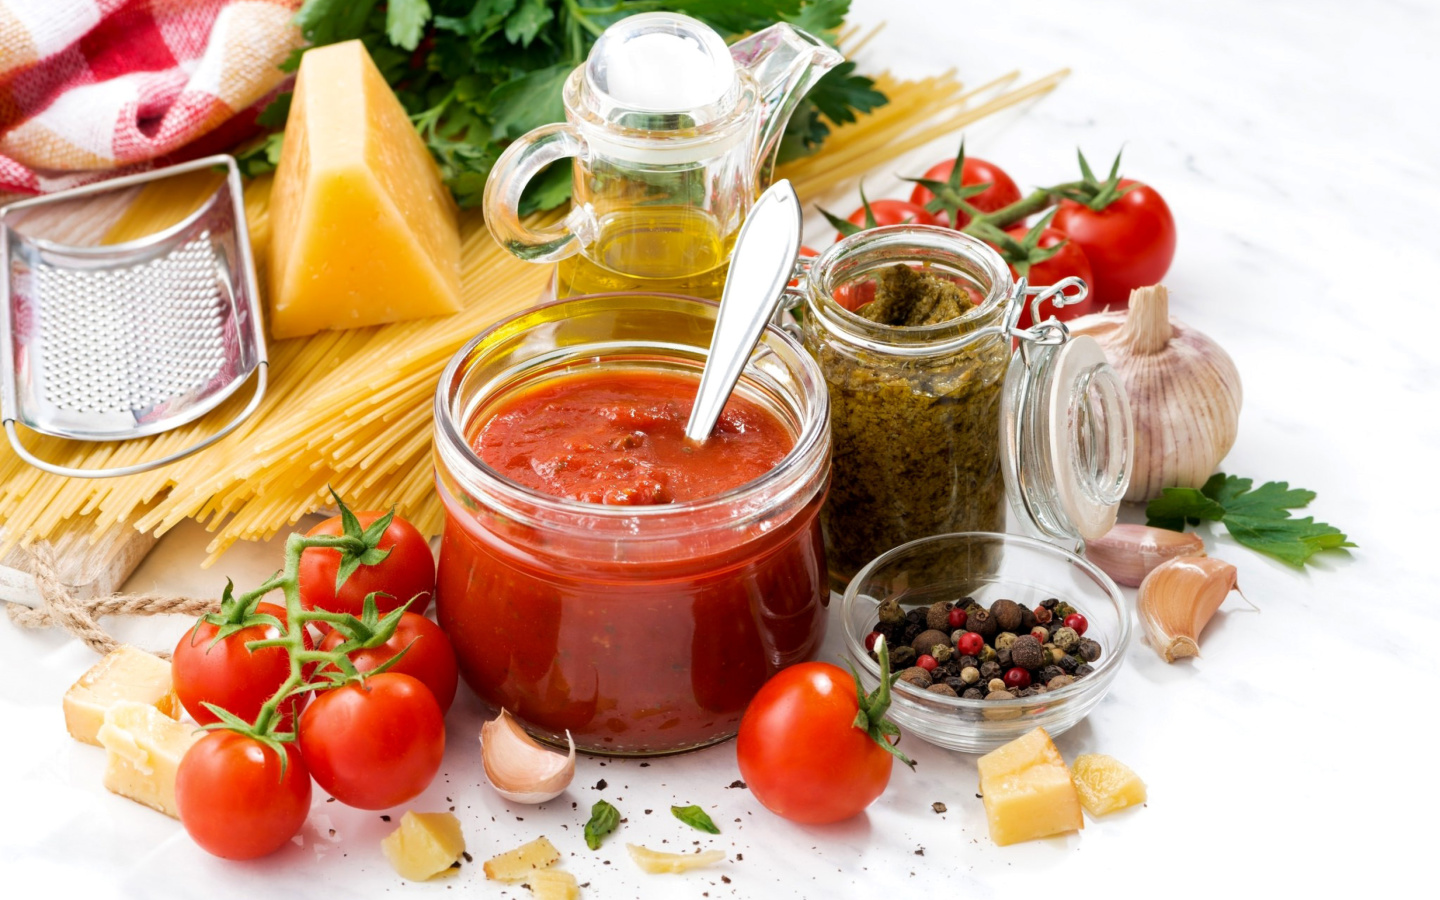 Das Lecho with tomatoes, spices and cheese Wallpaper 1440x900